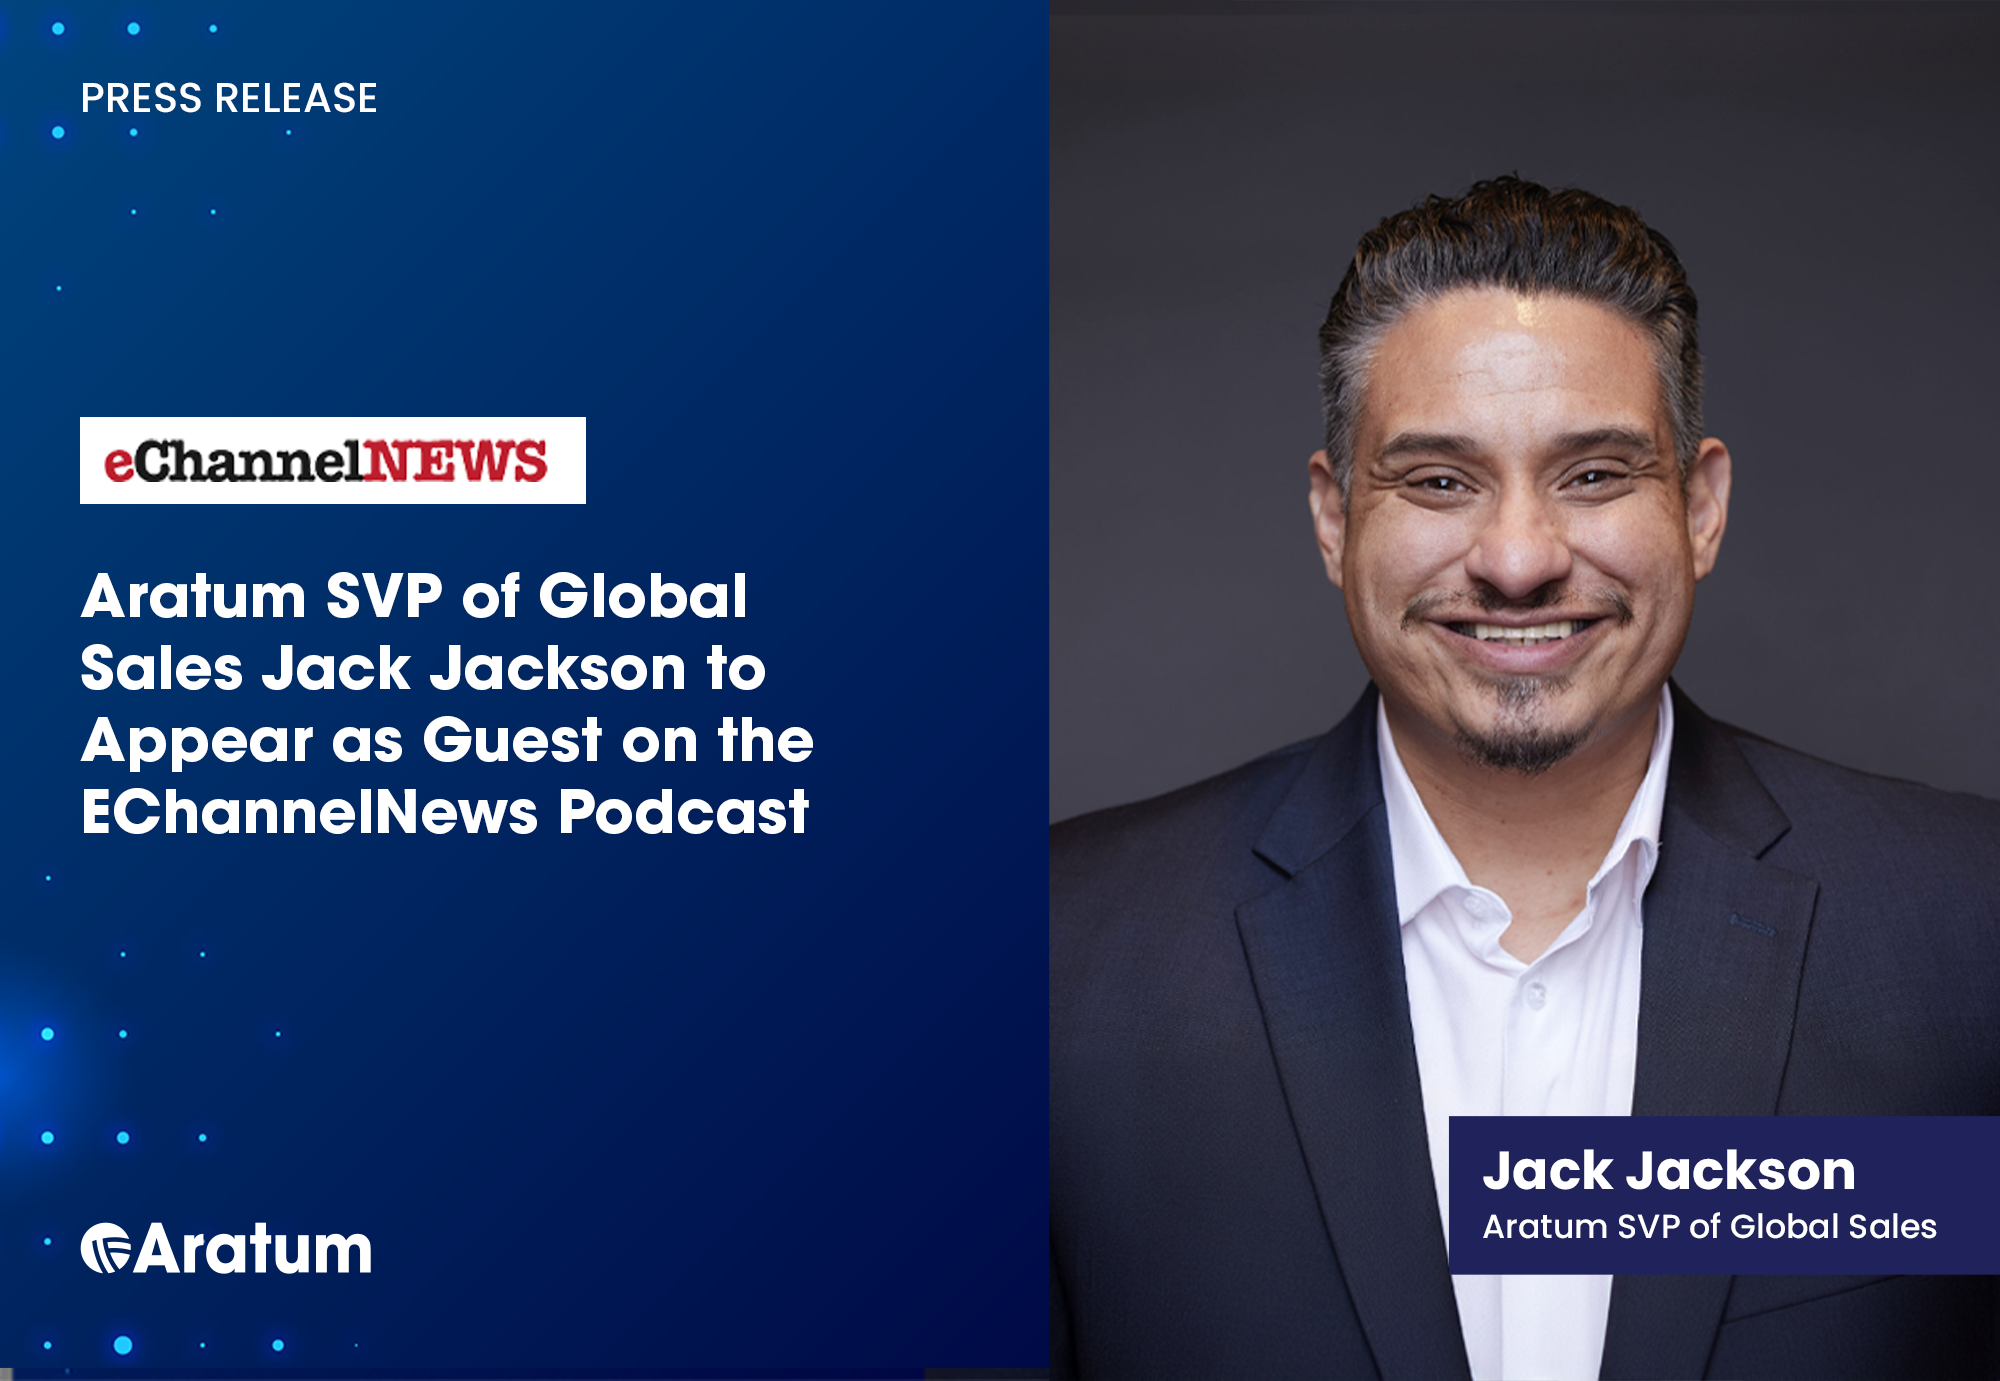 Aratum SVP of Global Sales Jack Jackson to Appear as Guest on the EChannelNews Podcast